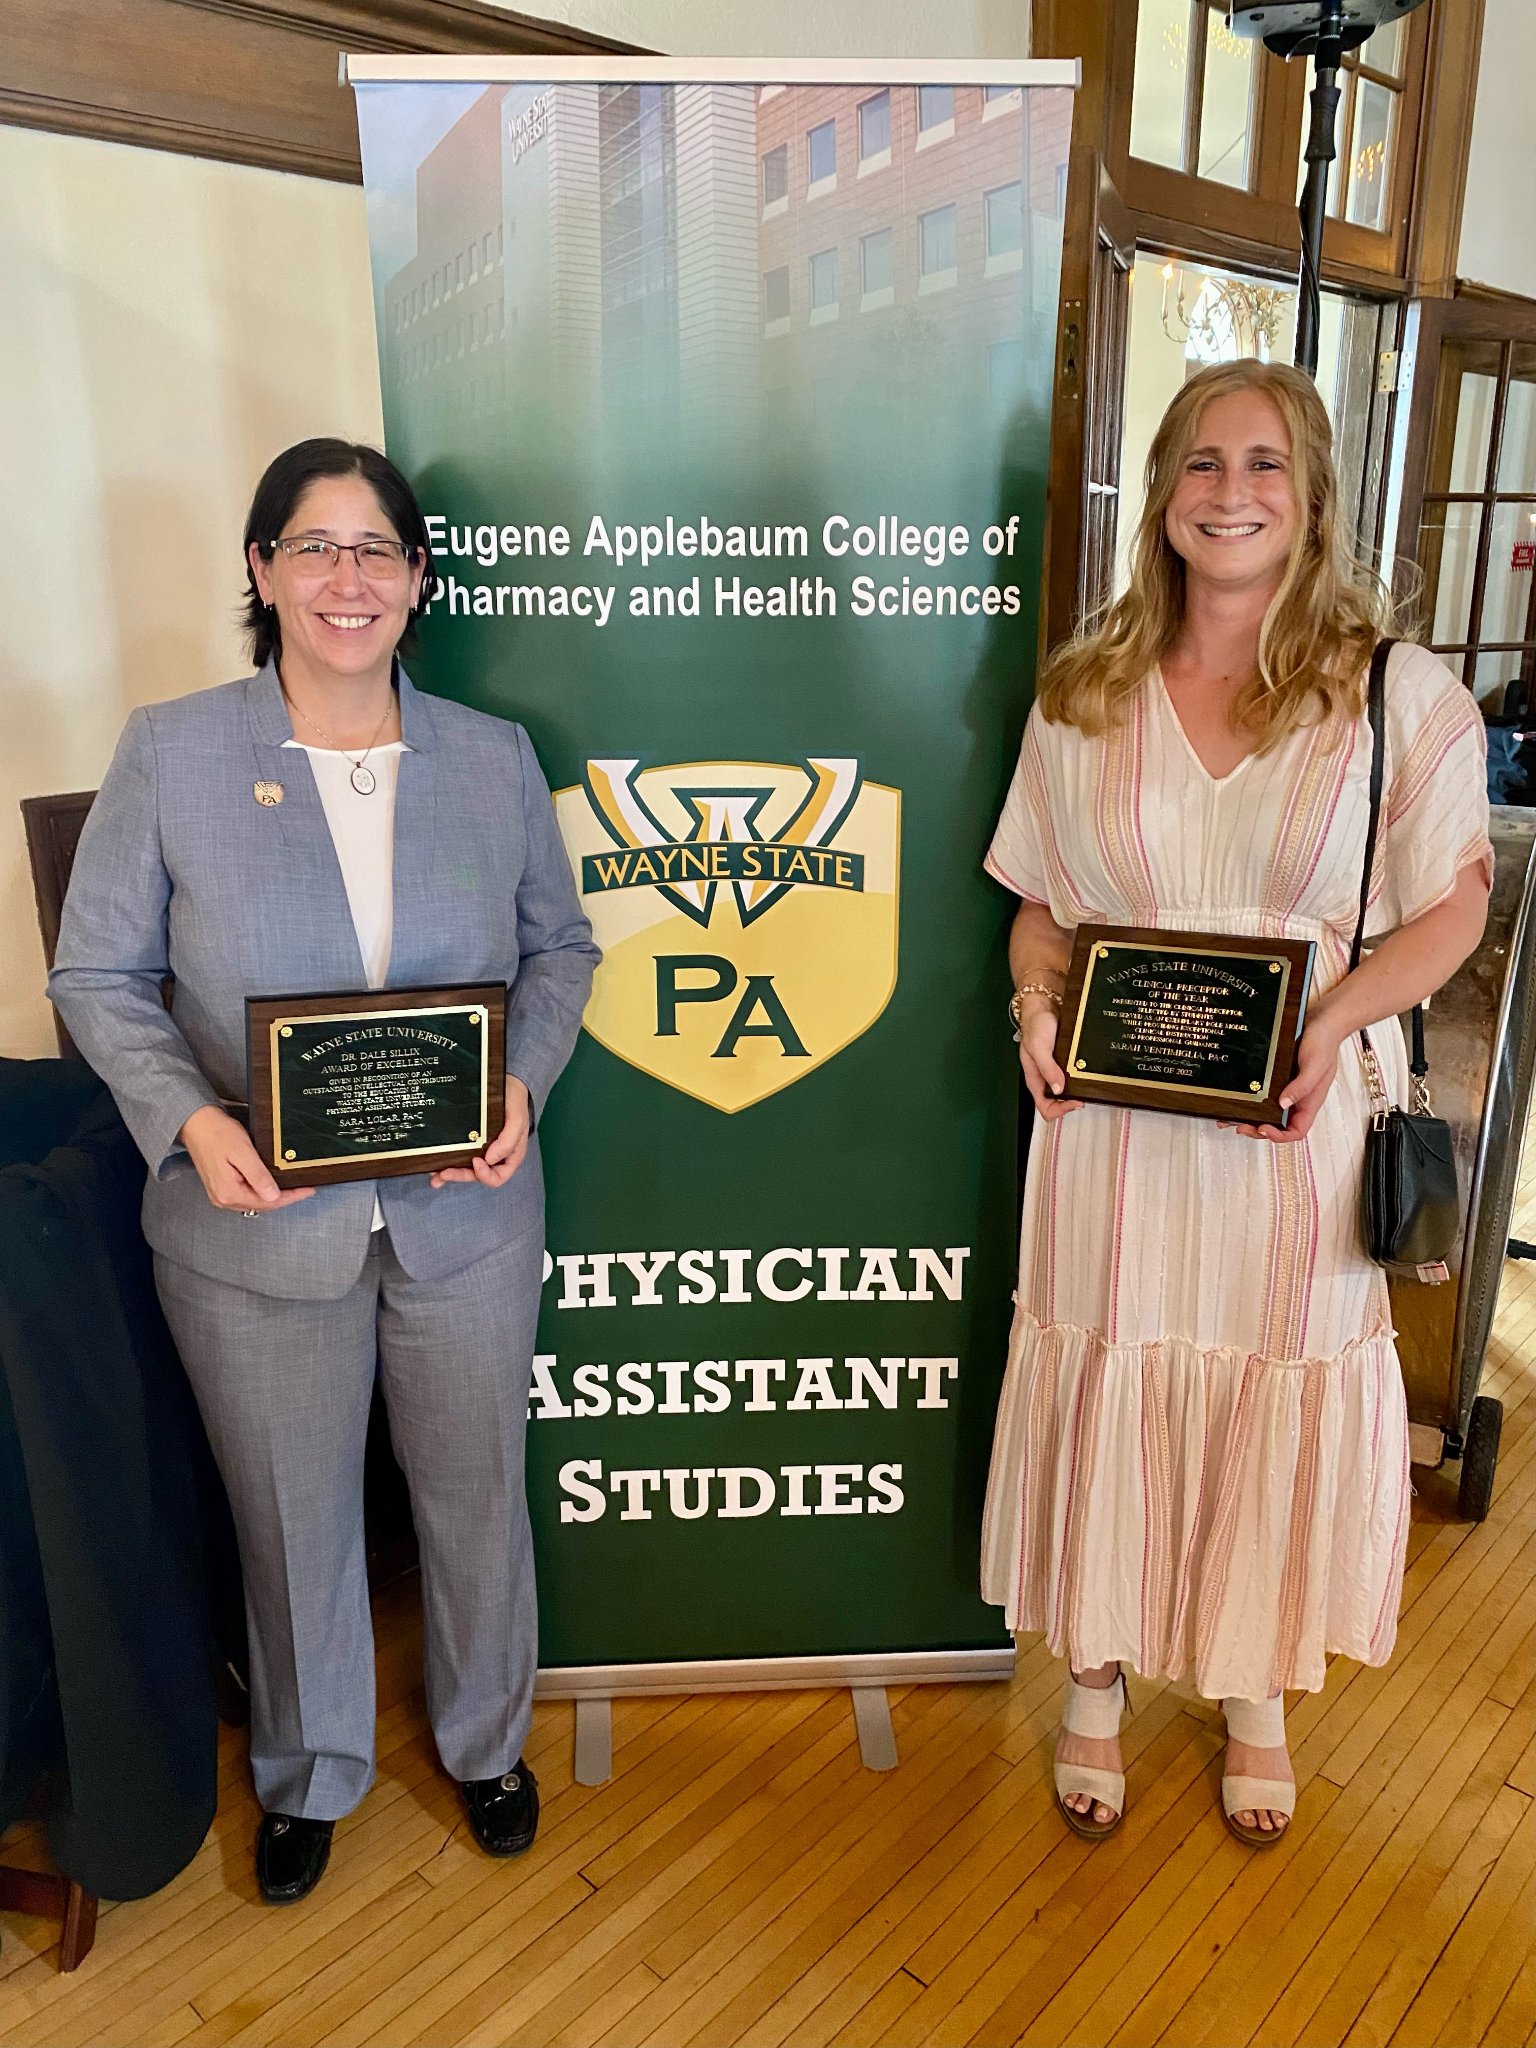 Wayne State PAS faculty and preceptors are honored